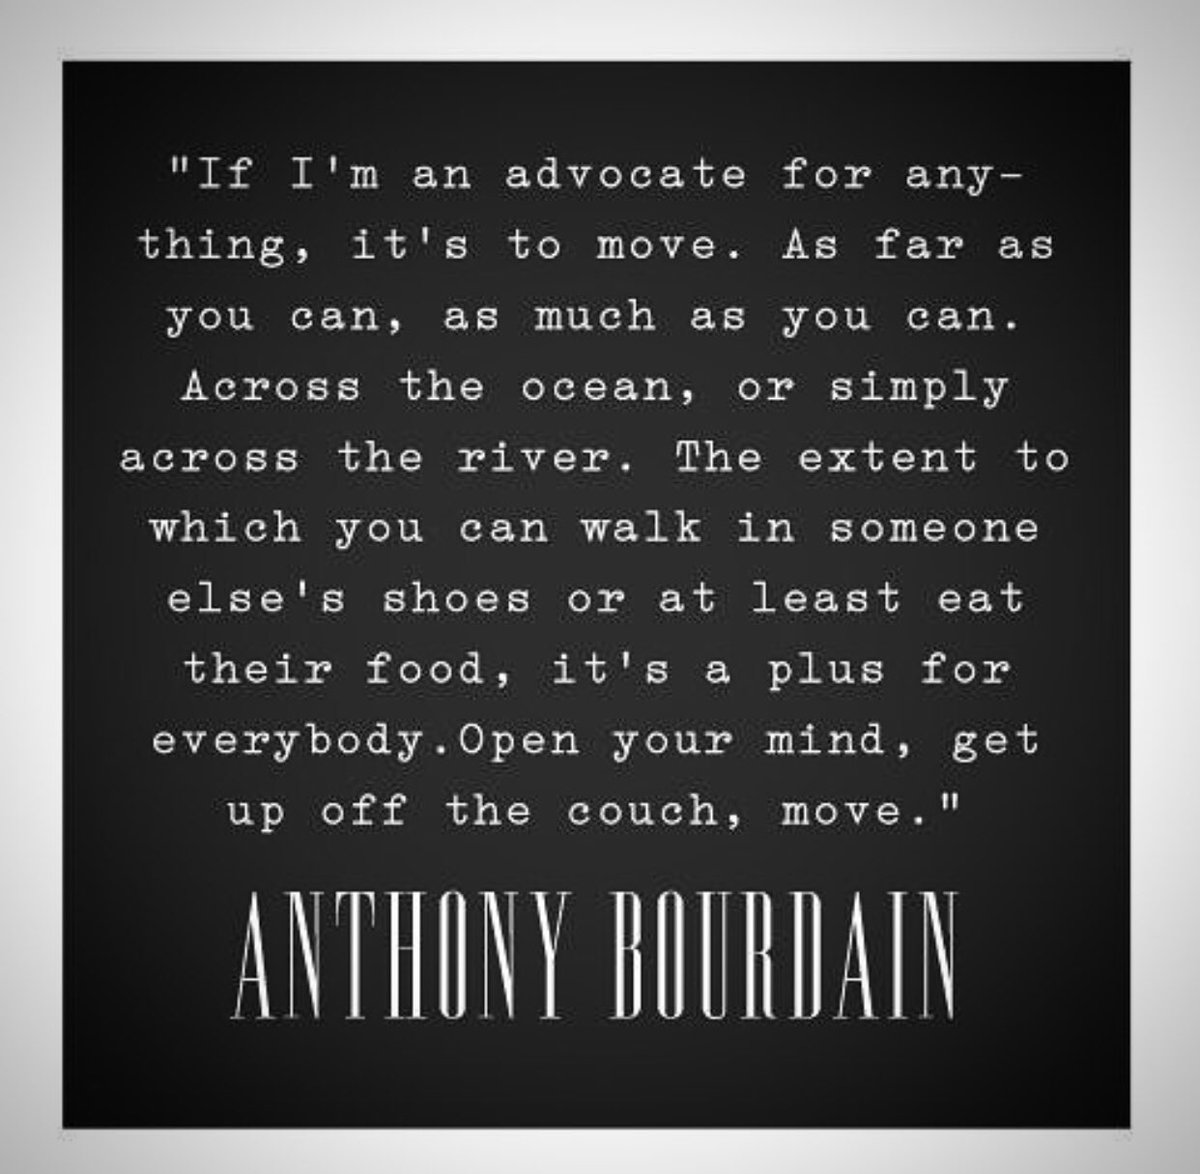 It’s gonna be hard to get through today I’m not gonna lie.... RIP Anthony Bourdain. https://t.co/l3uFJ3VzYC